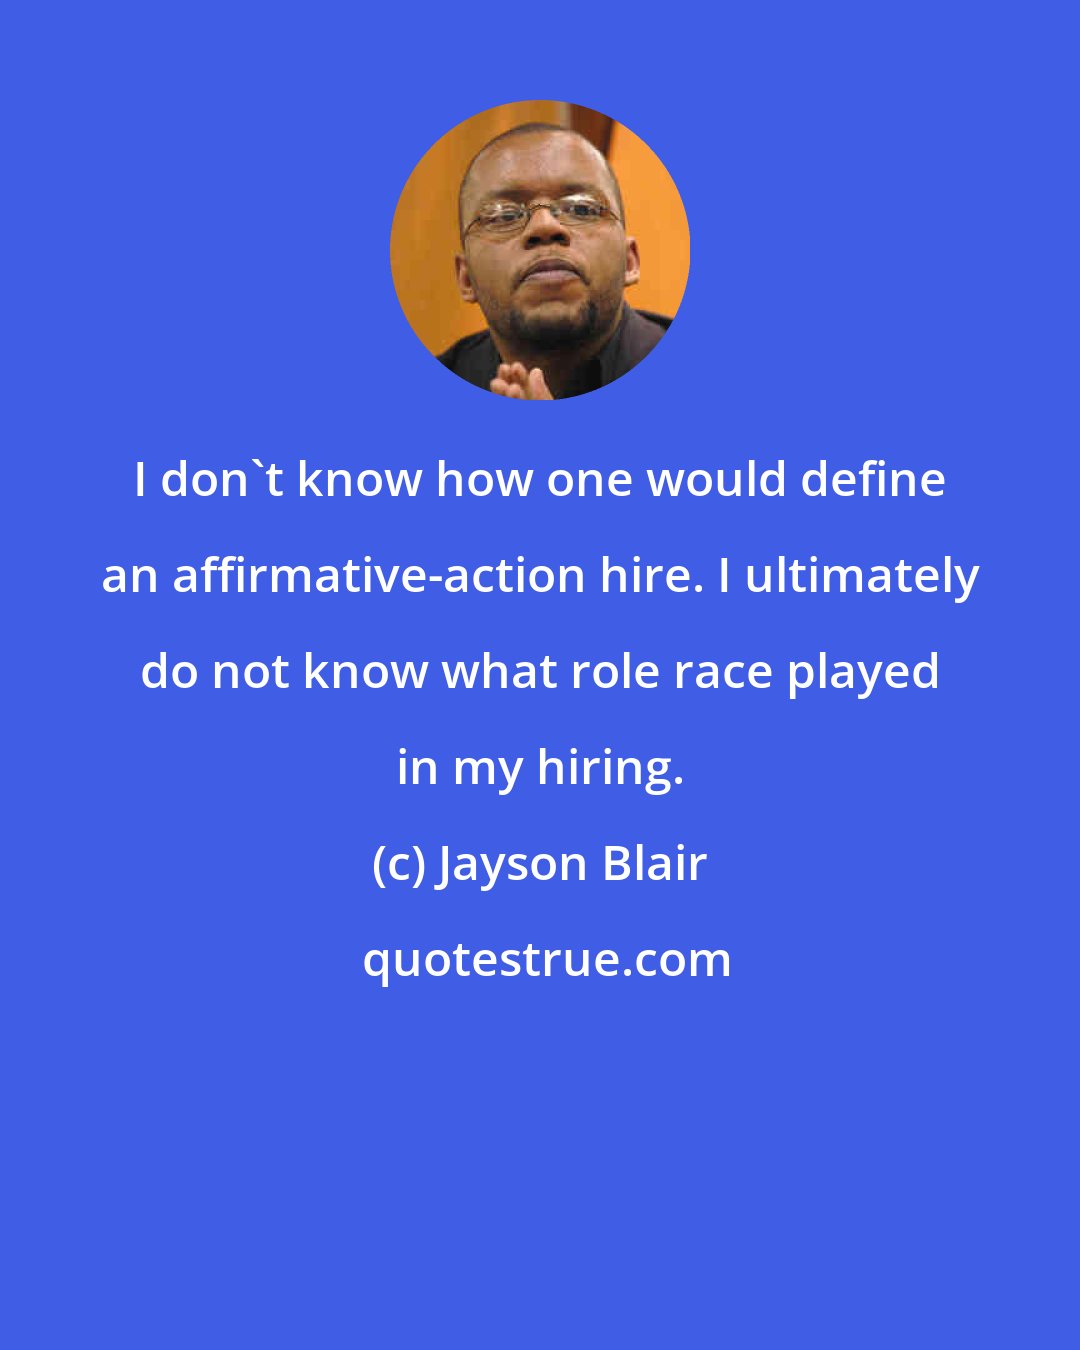 Jayson Blair: I don't know how one would define an affirmative-action hire. I ultimately do not know what role race played in my hiring.